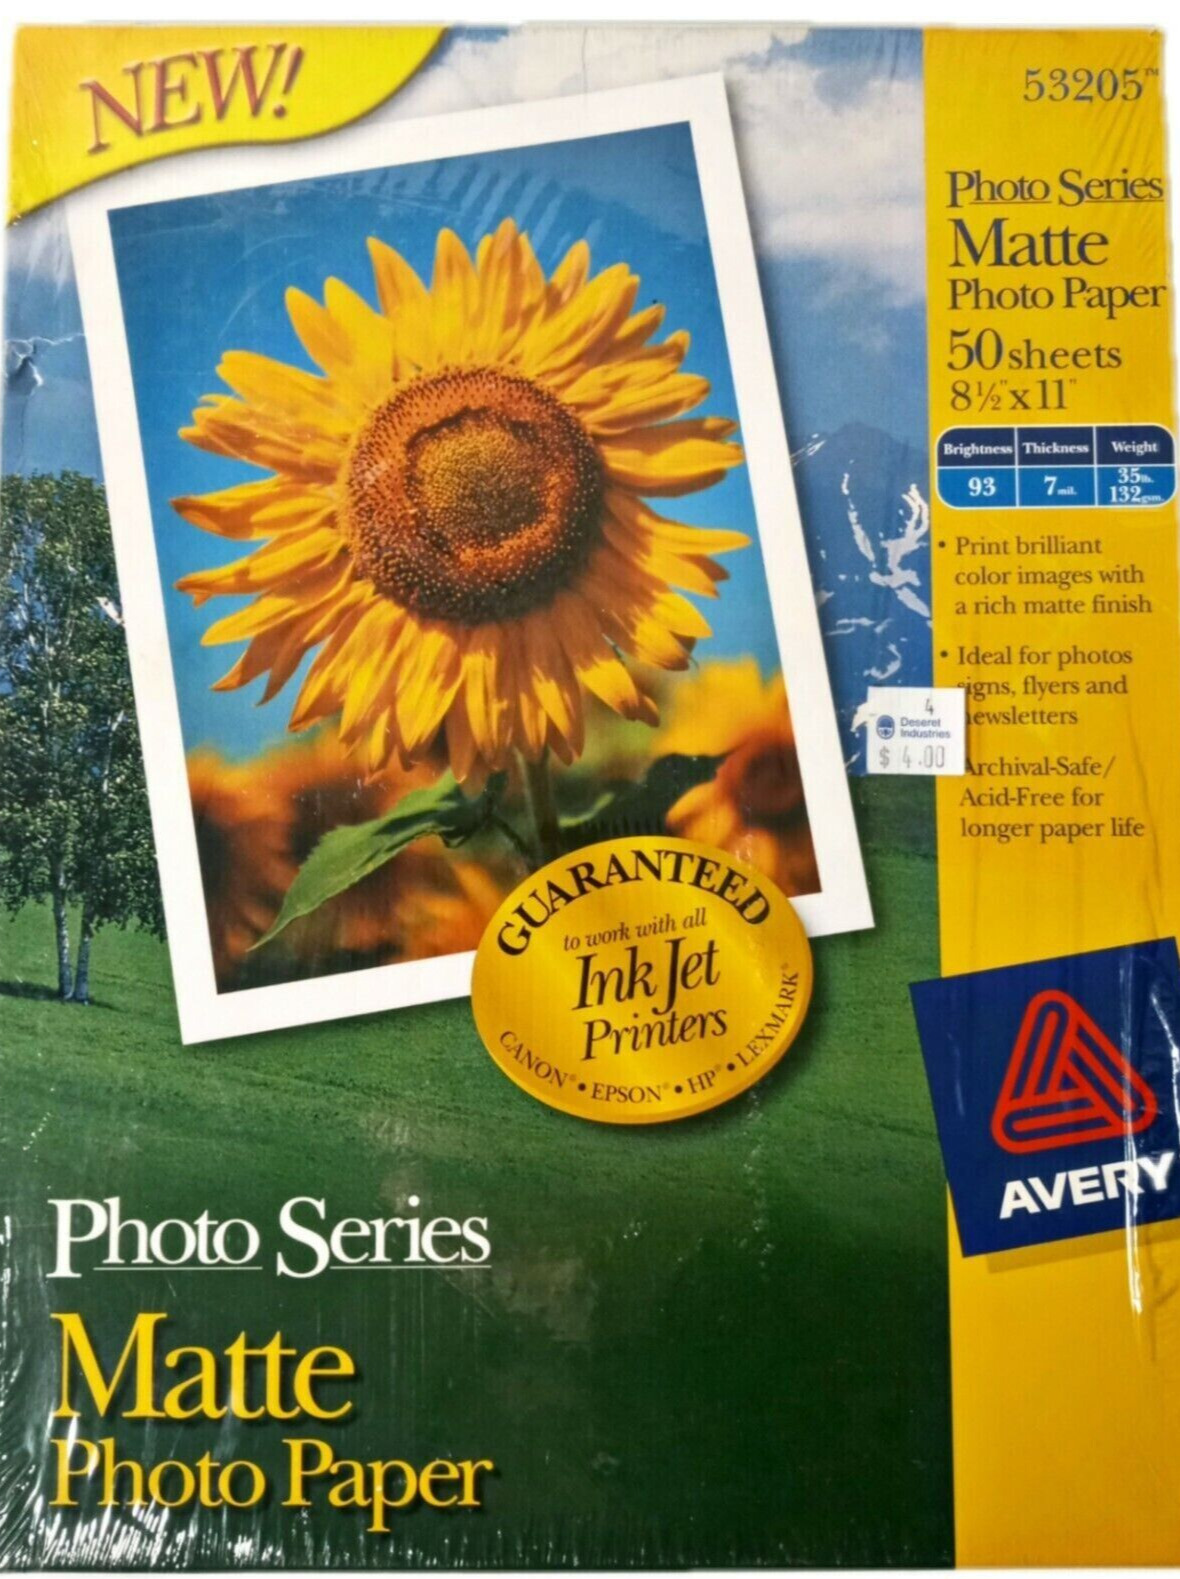 Avery Photo Paper Ink Jet 8.5 x 11 Matte Coated 50 Sheets 53205 Acid Free